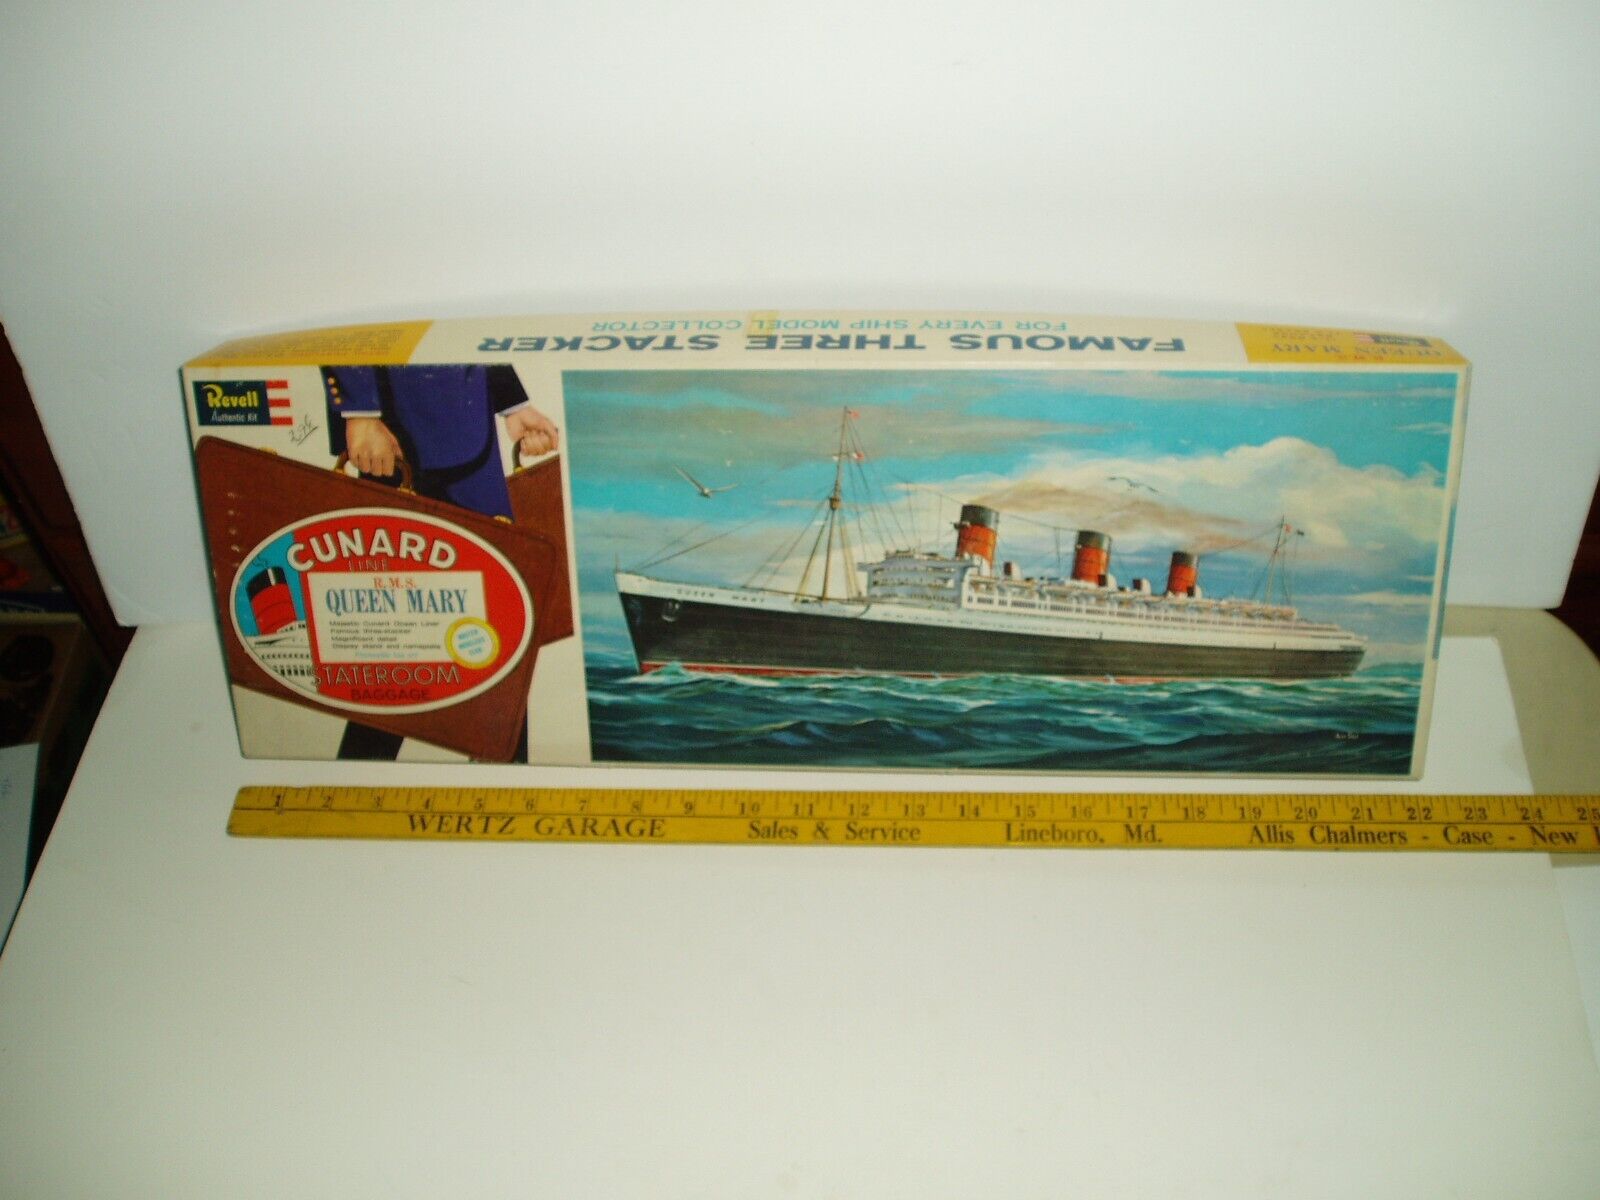 vintage Revell H-311-298 R.M.S. Queen Mary Cunard Line 1962 model kit